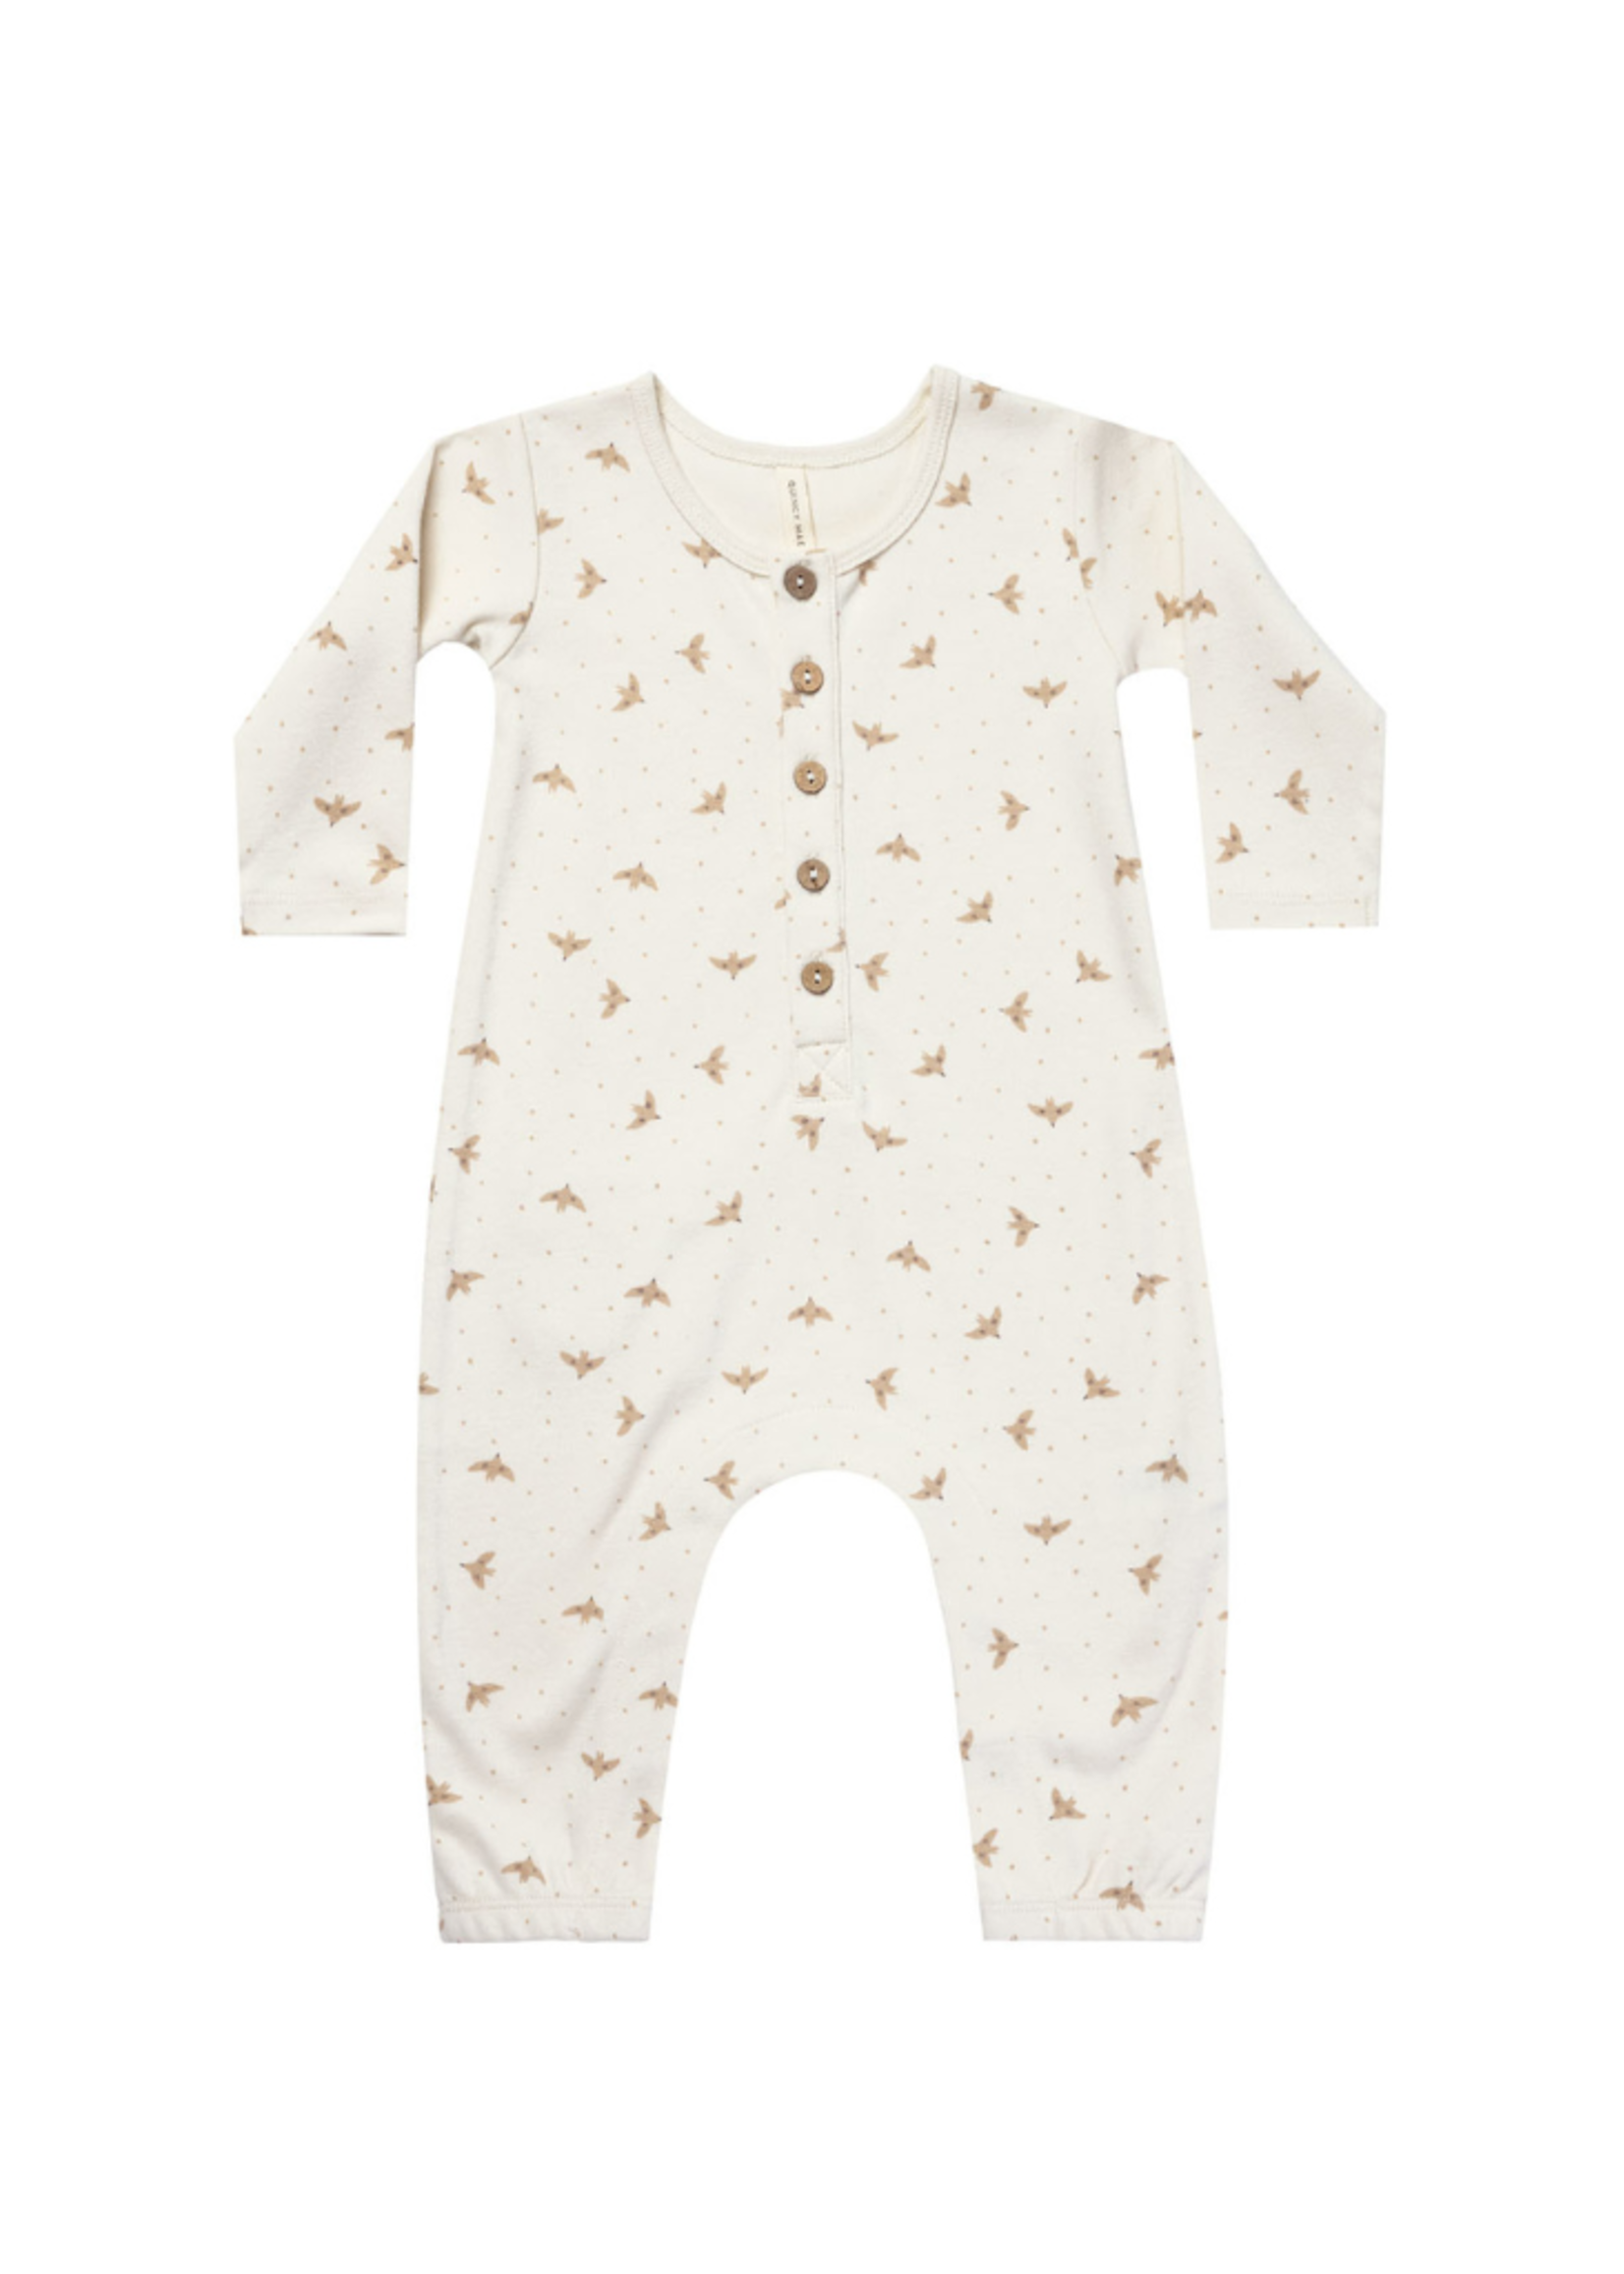 Quincy Mae Long Sleeve Jumpsuit - Doves